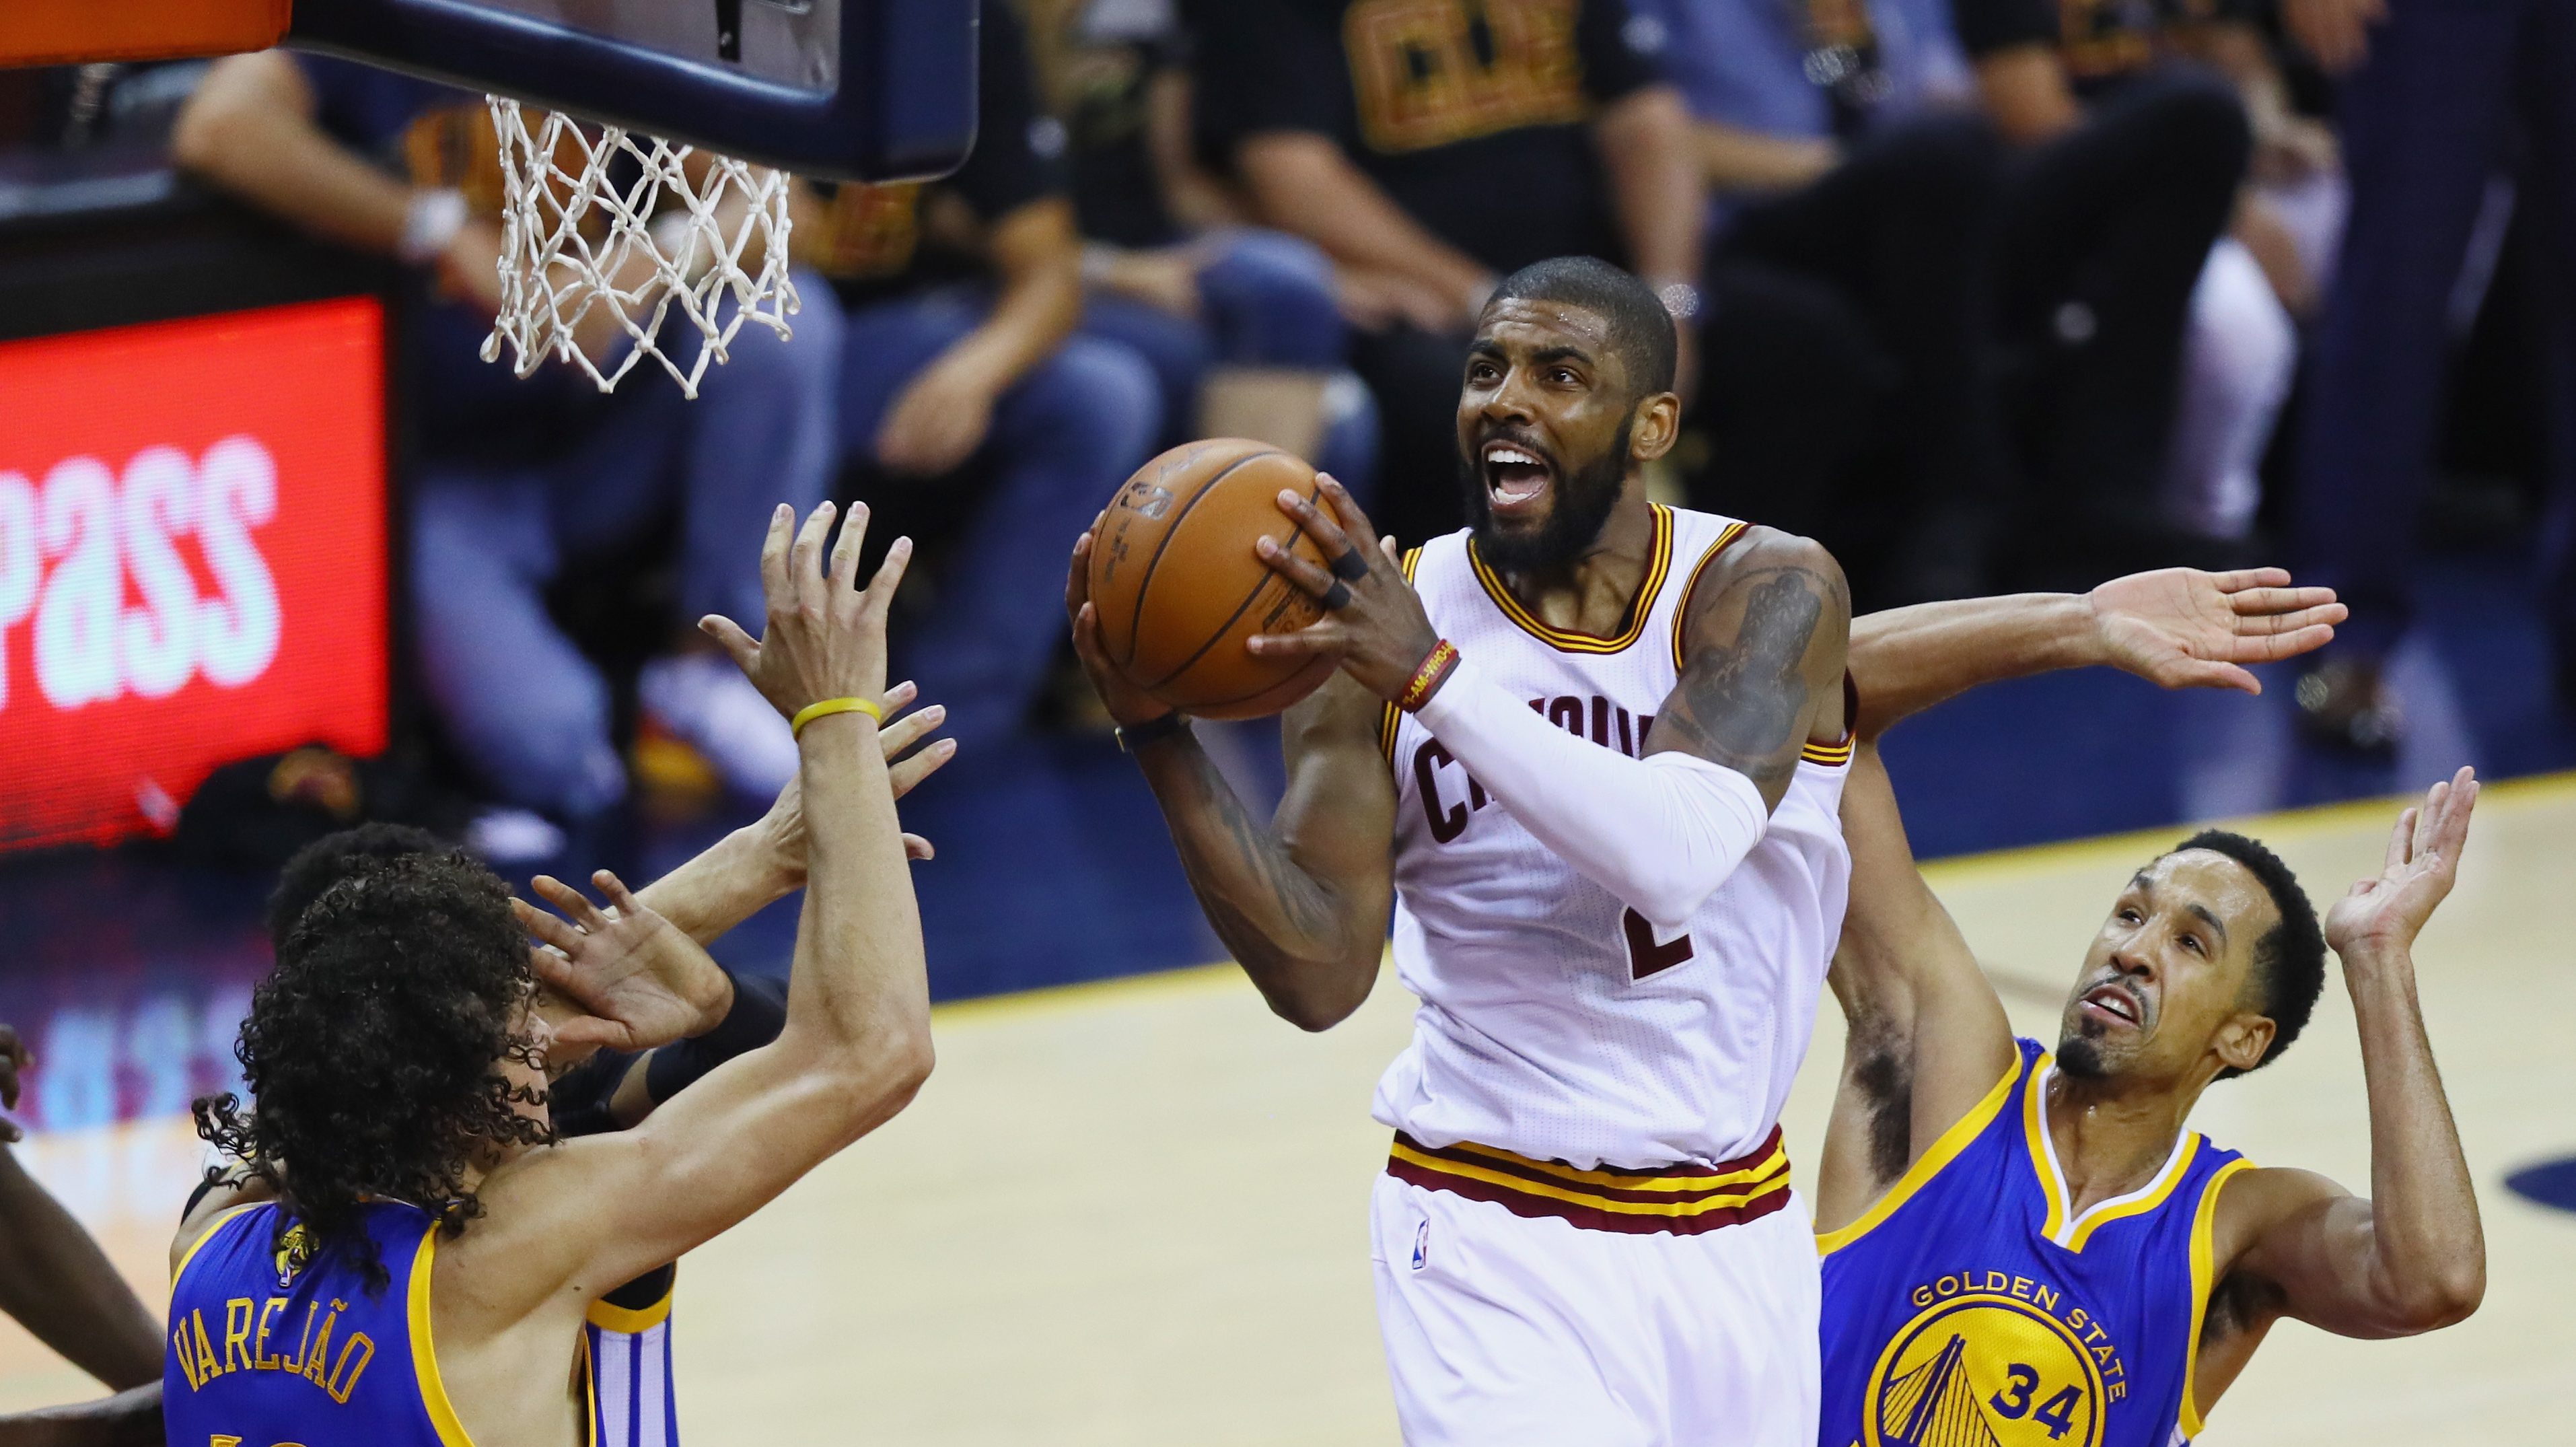 kyrie irving cleveland stats